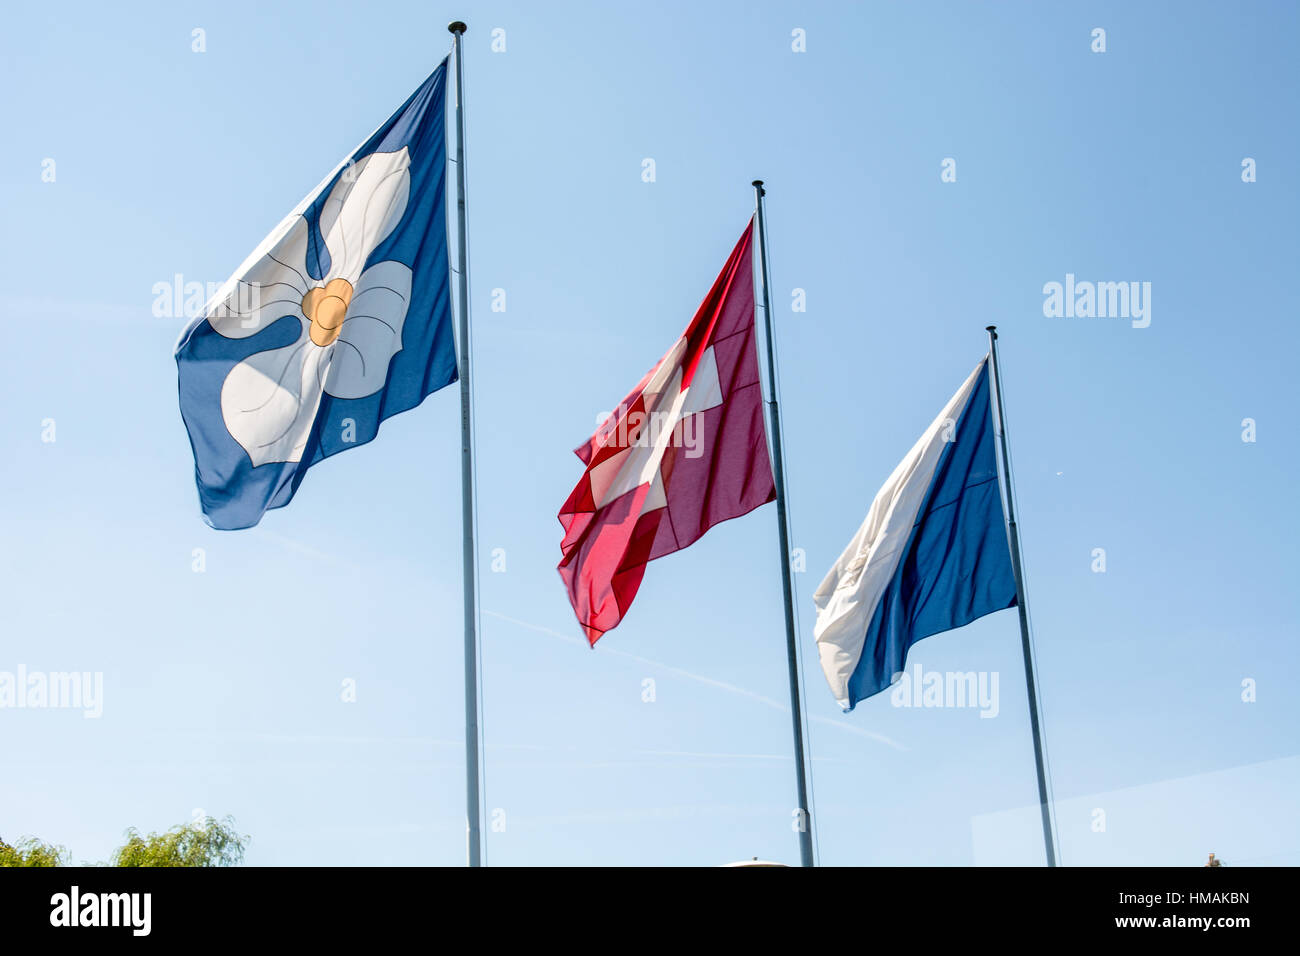 Flags of Zurich and Switzerland on flag poles on a summer day in Zurich with blue sky Stock Photo